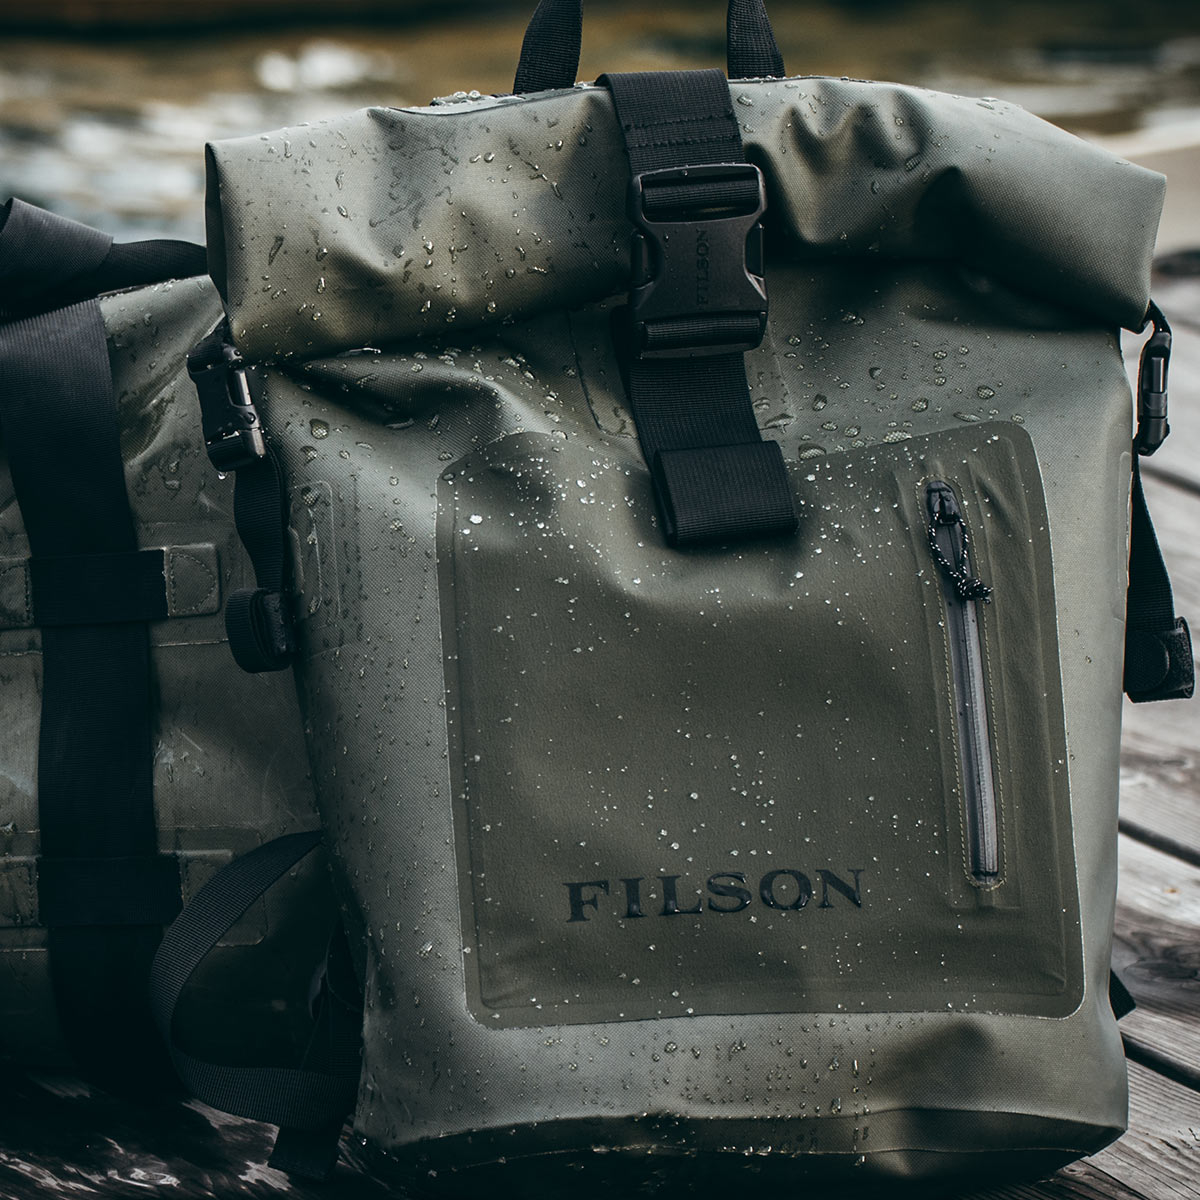 Filson Dry Backpack, keeps your gear dry in any weather